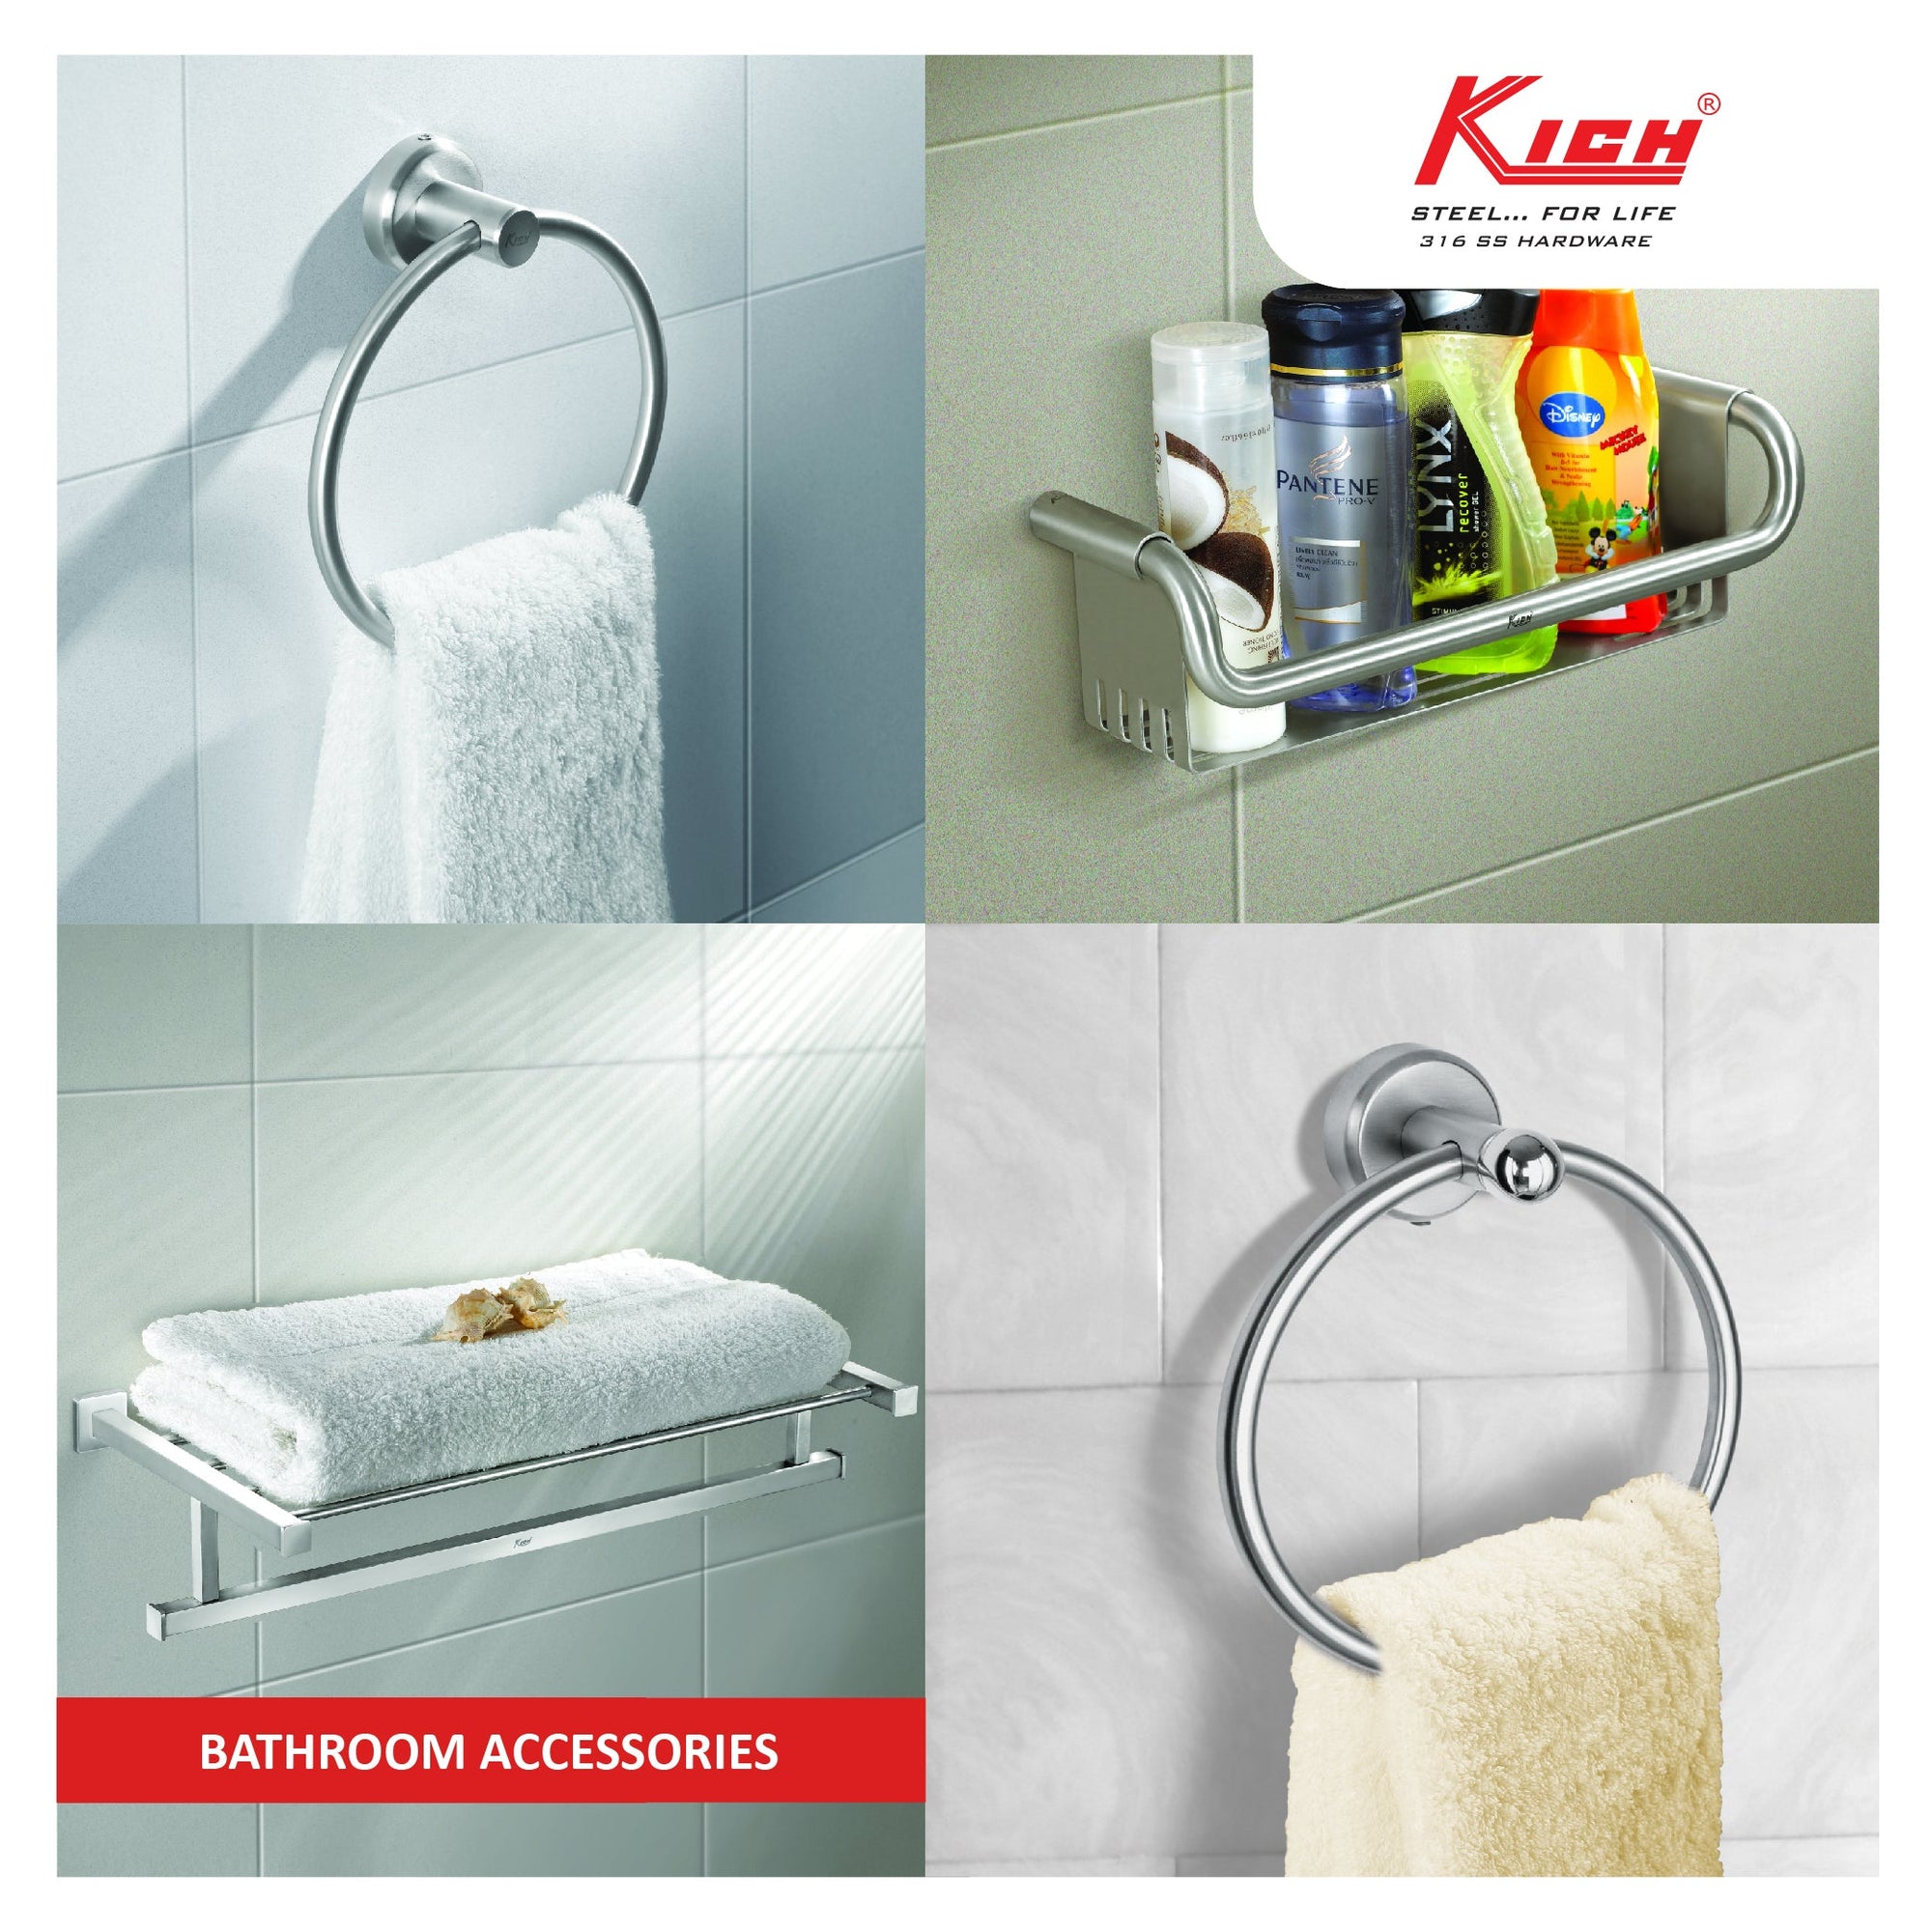 Kich Bathroom Accessories - Elevate Your Bathroom with Stylish and Functional Products